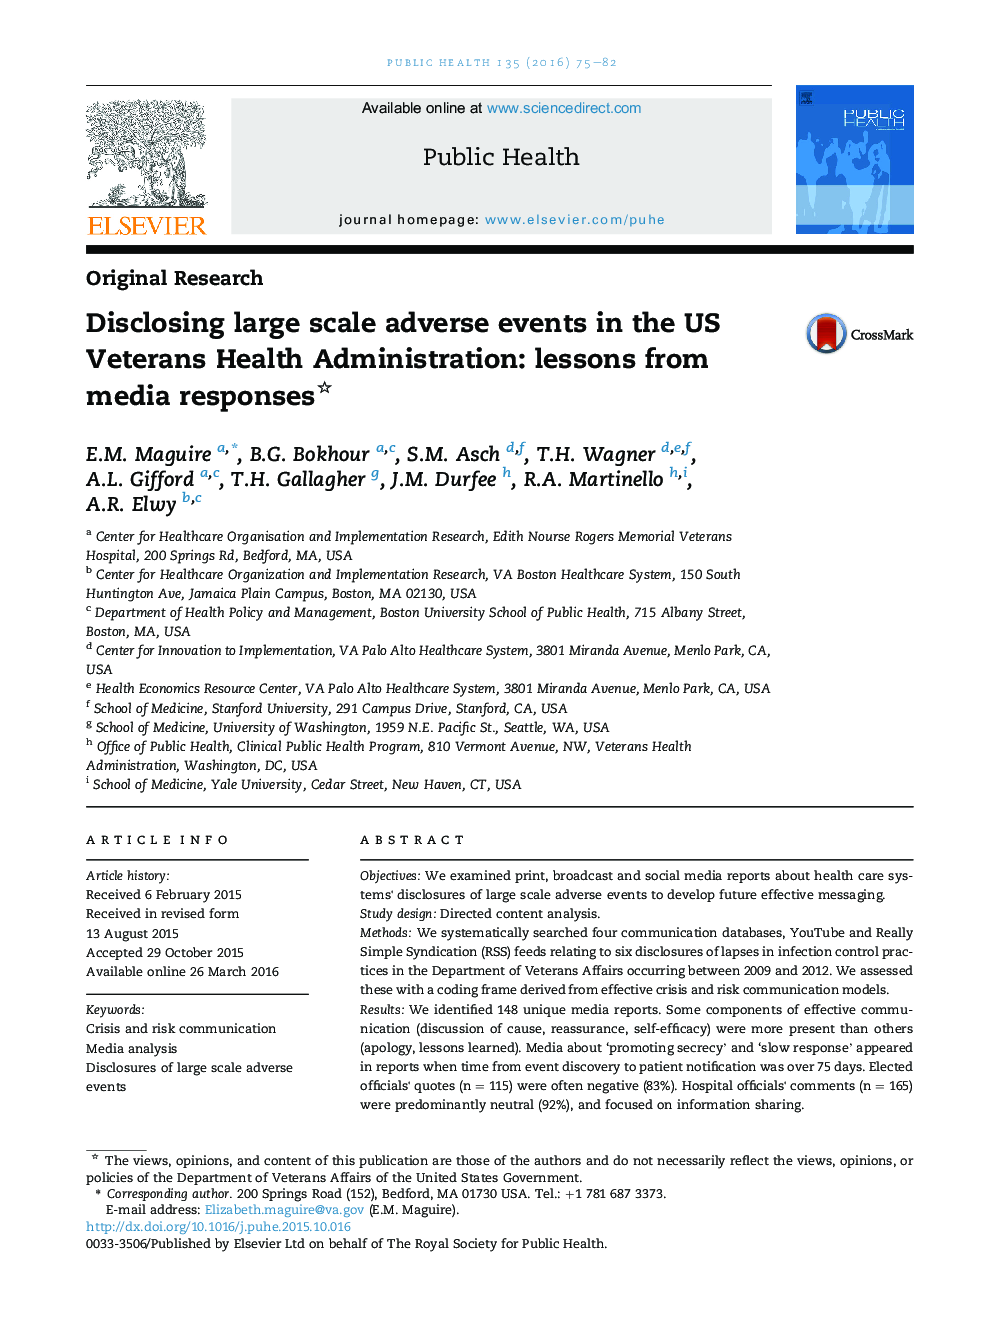 Disclosing large scale adverse events in the US Veterans Health Administration: lessons from media responses 